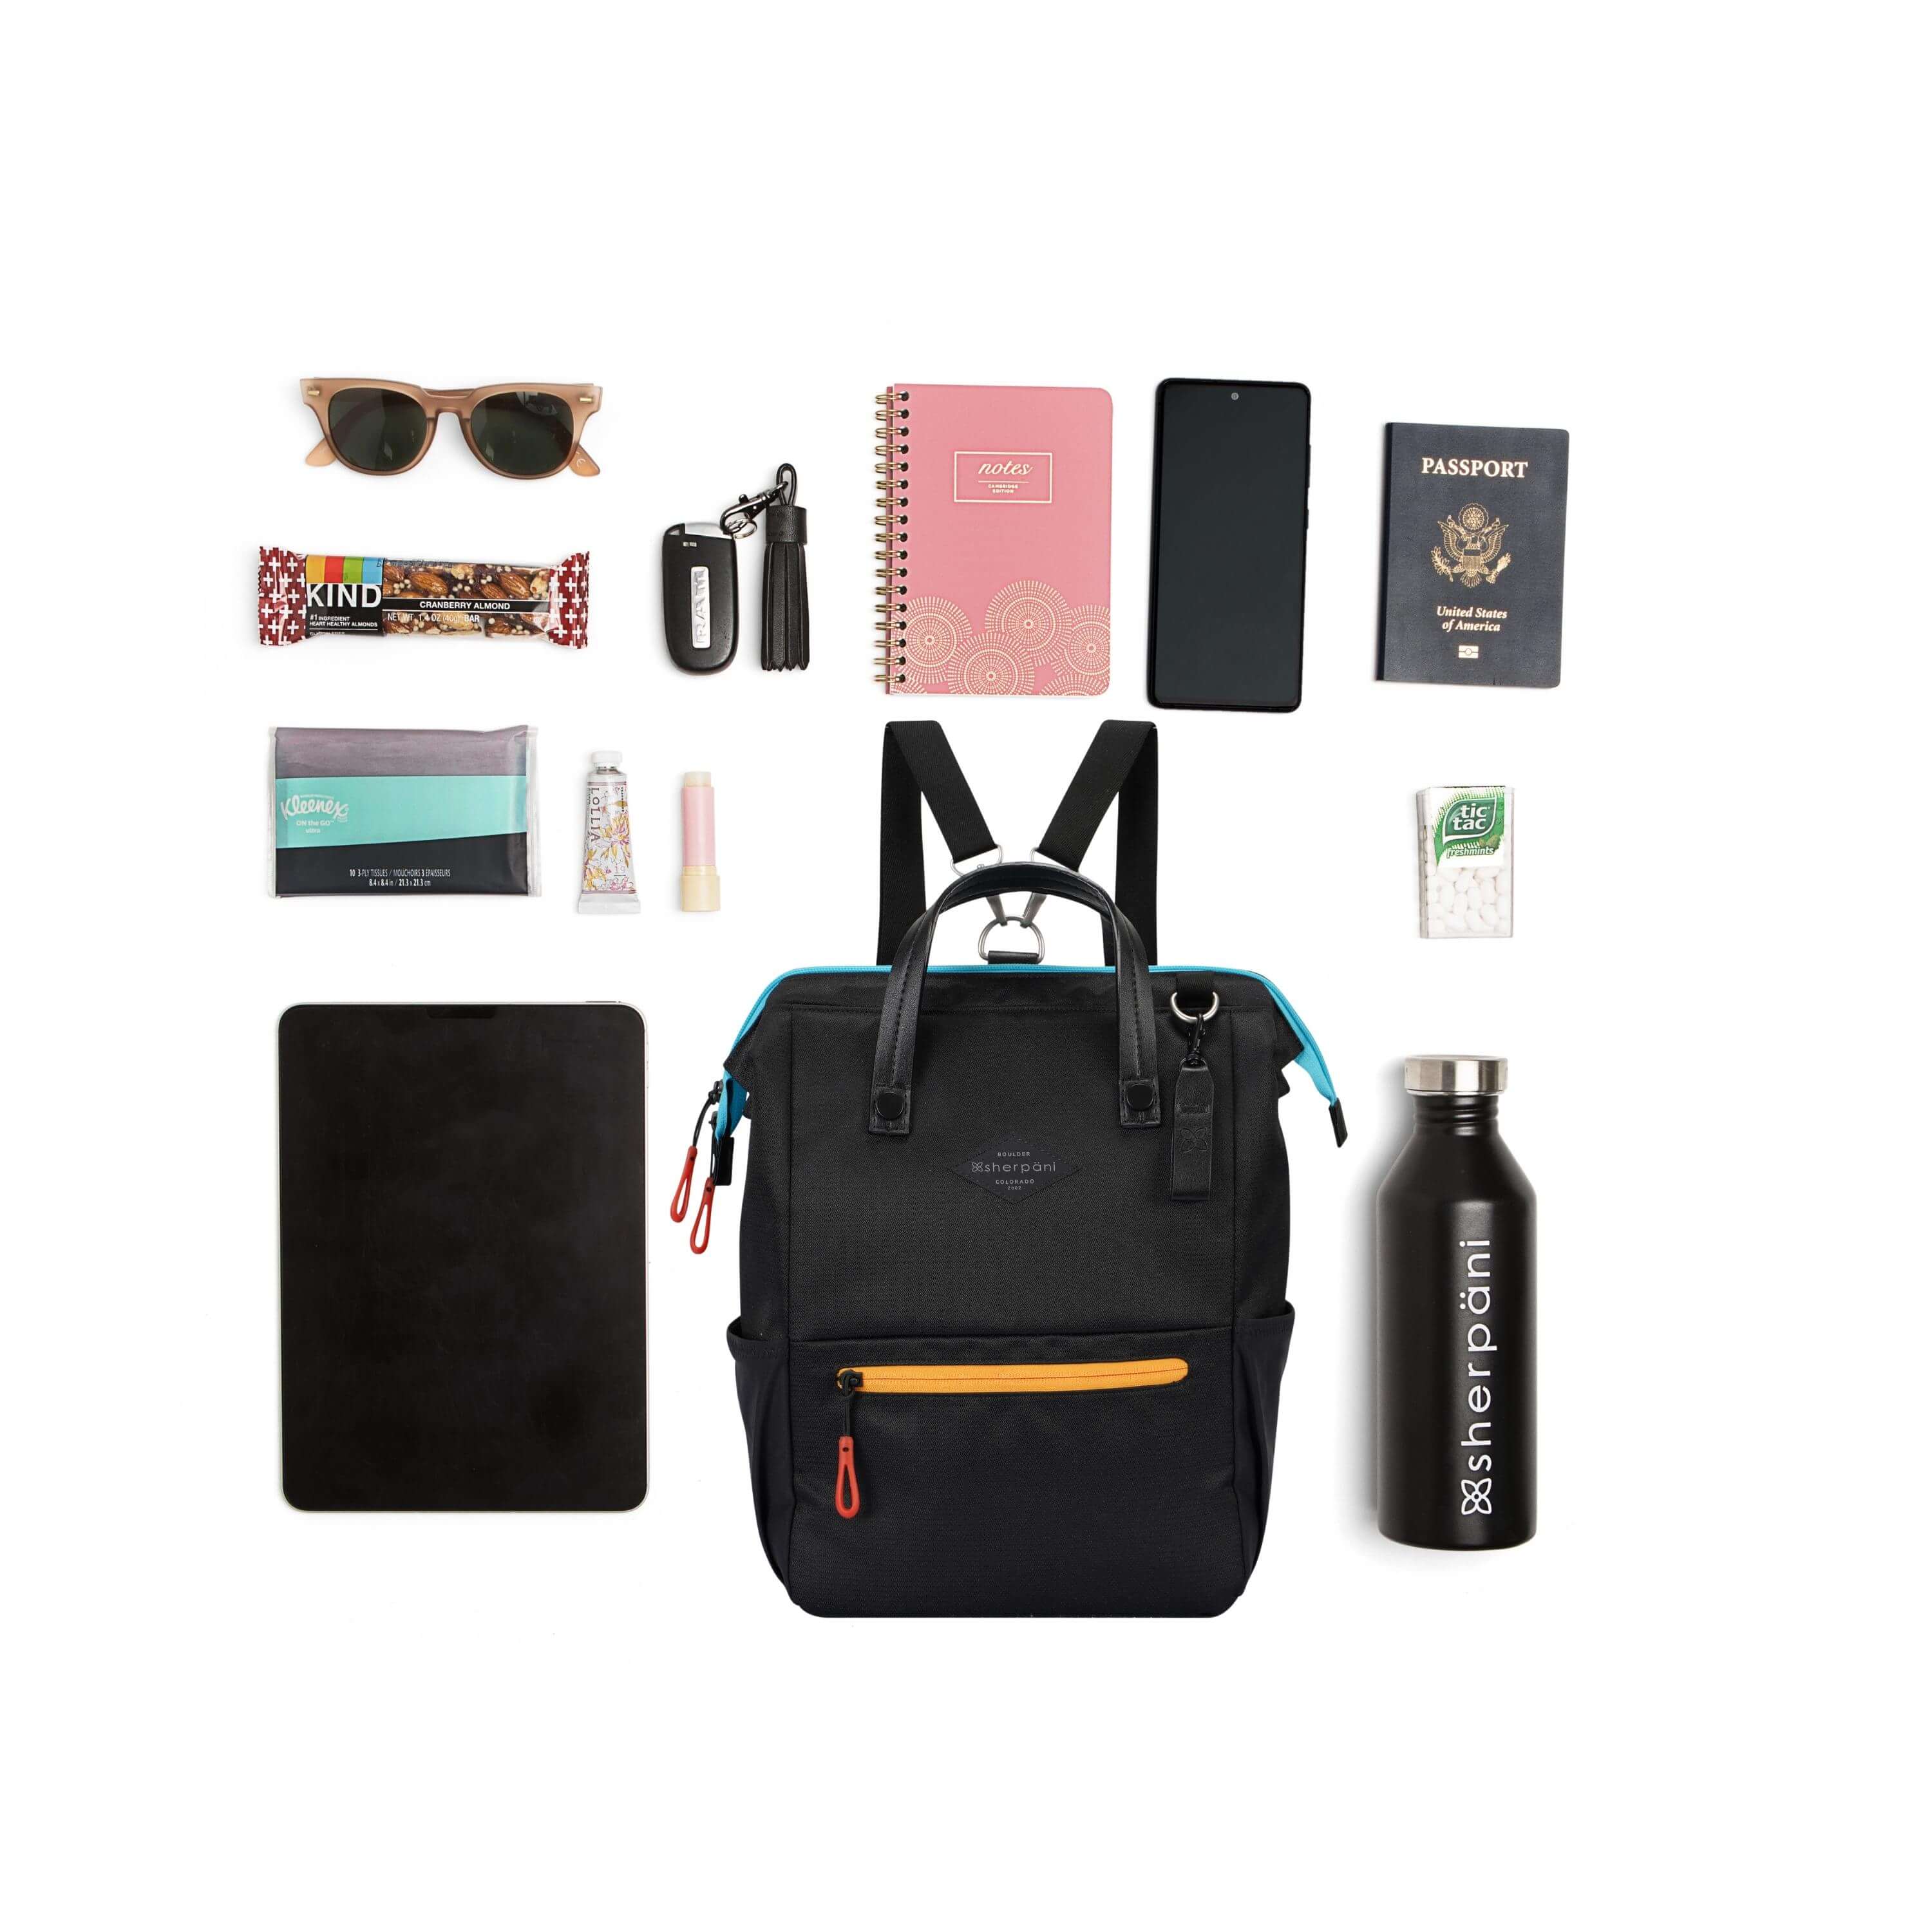 Top view of example items to fill the bag. Sherpani three-in-one bag, the Dispatch in Chromatic, lies in the center. It is surrounded by an assortment of items: sunglasses, granola bar, tissues, tablet, hand lotion, lip balm, car key, notebook, phone, passport, mints and water bottle. 